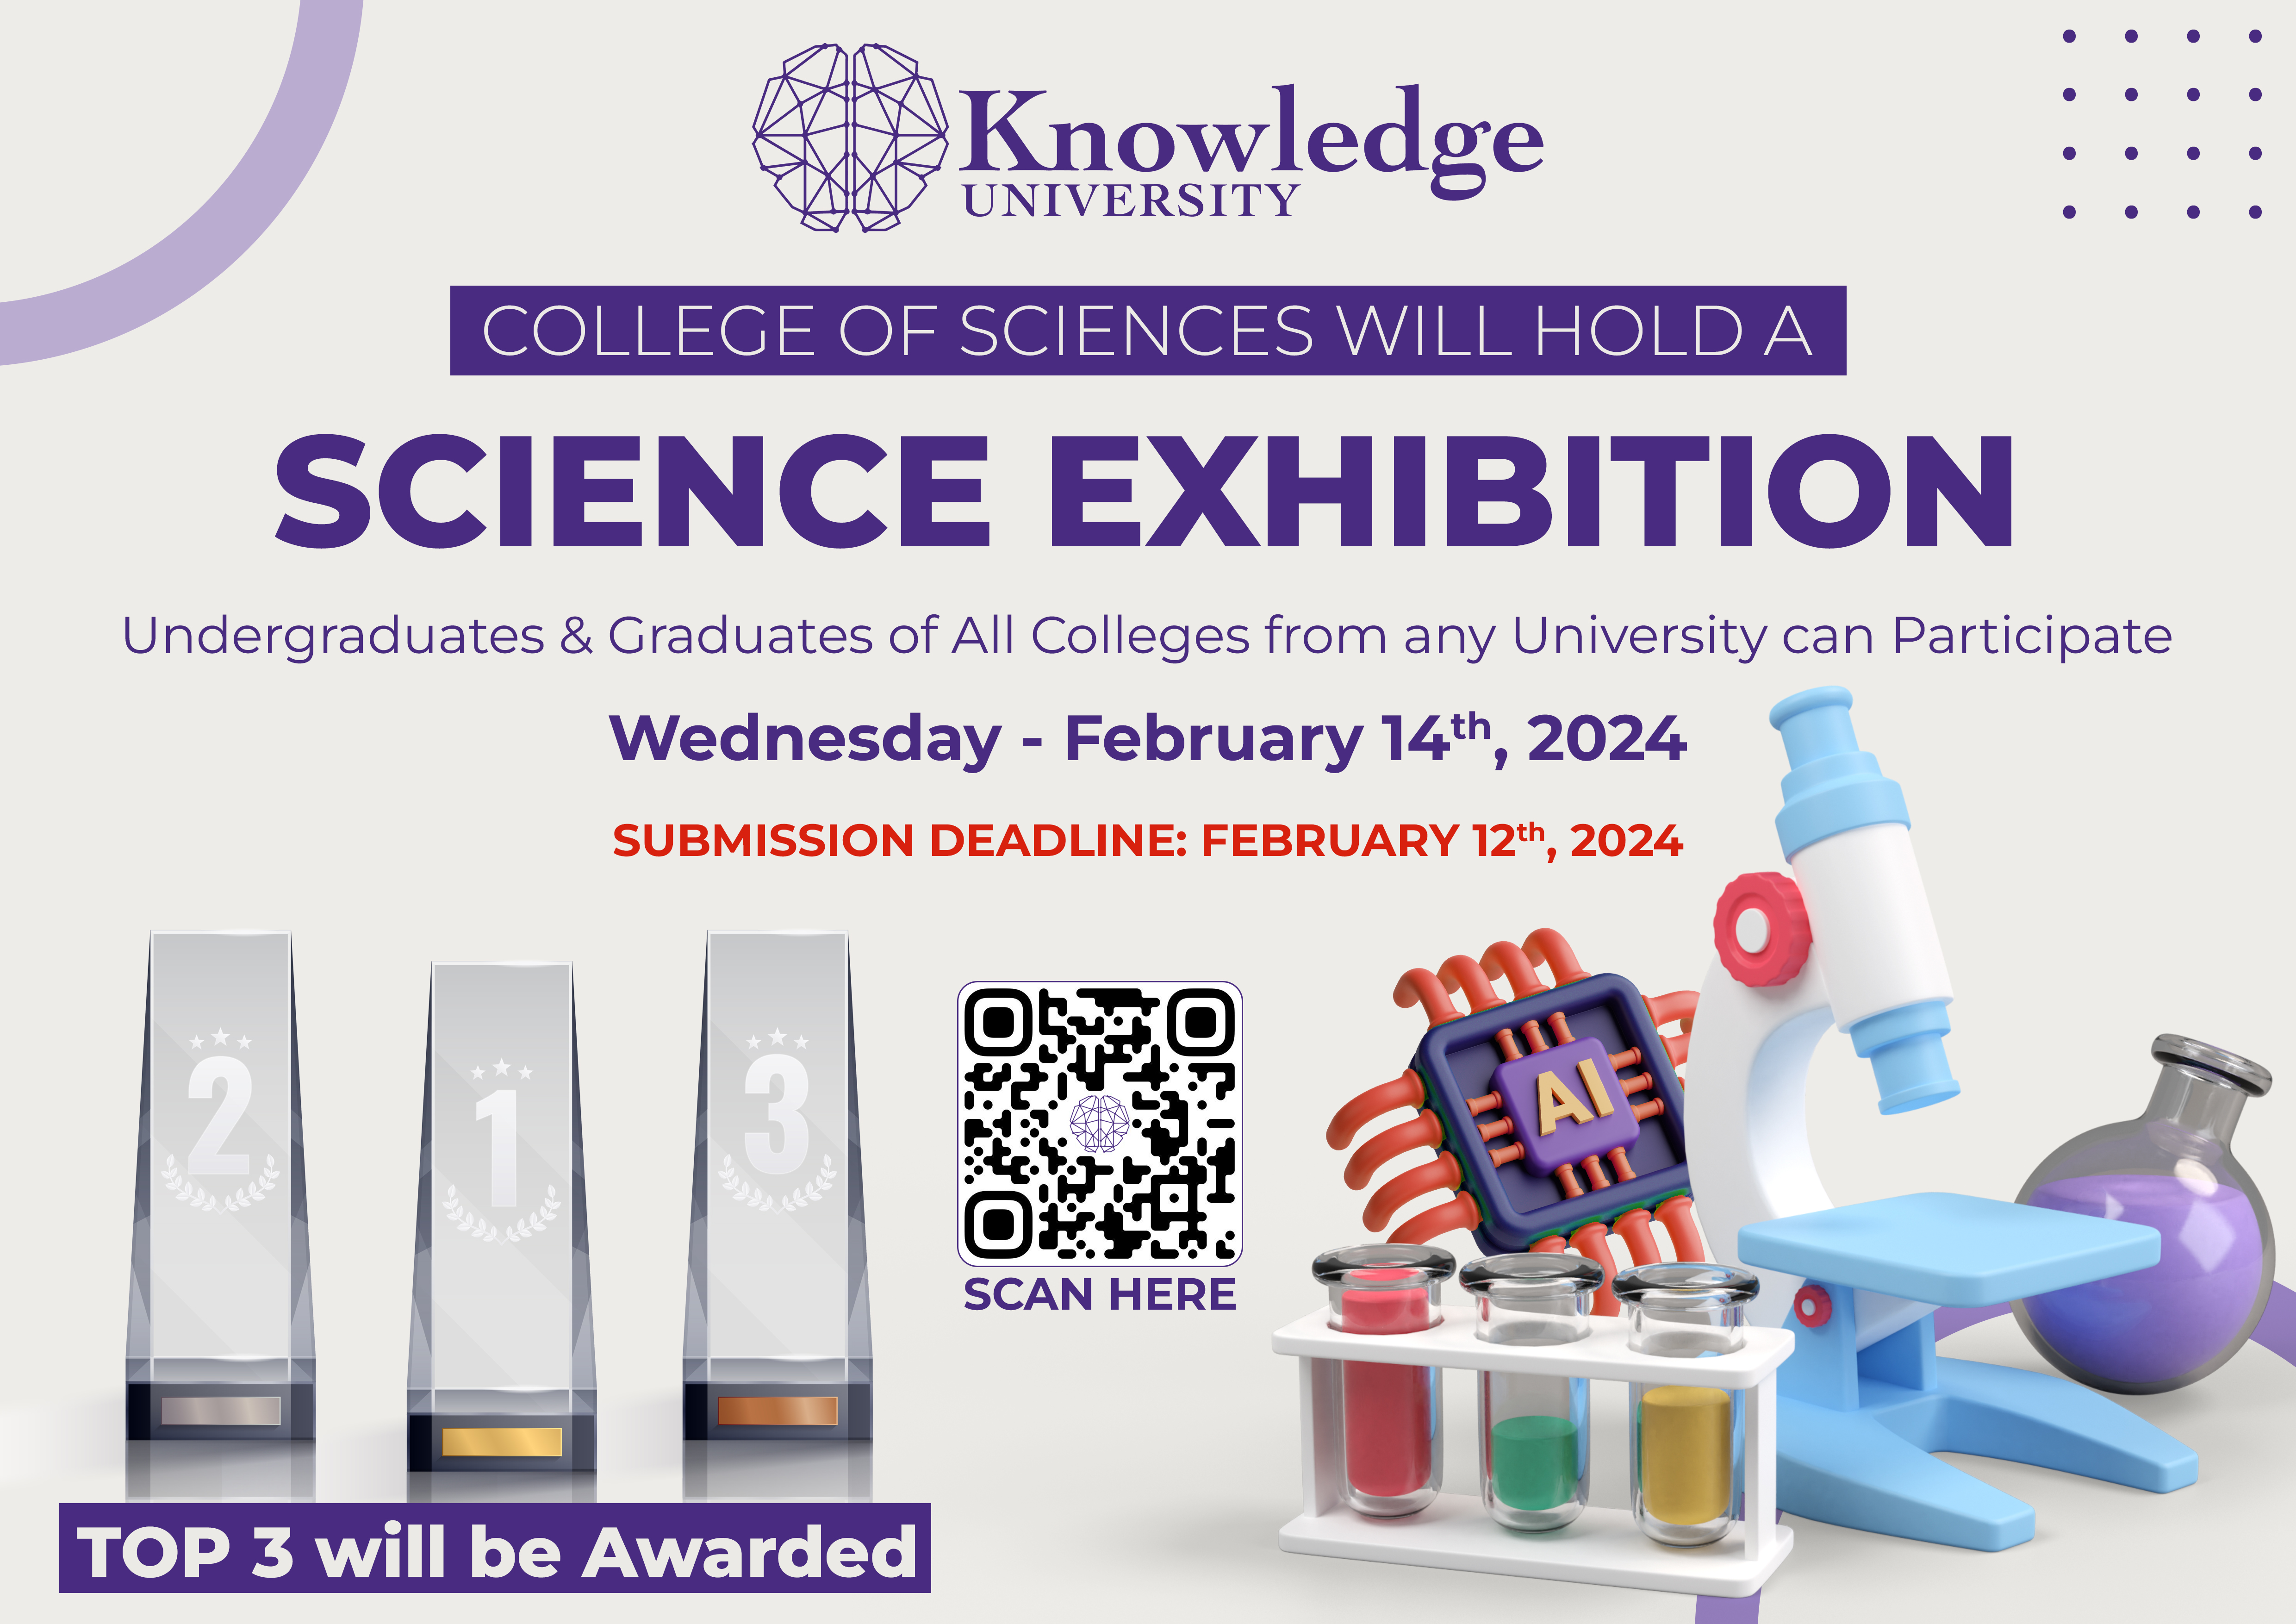 College of Sciences at Knowledge University to Host Grand Scientific Exhibition, Welcoming Students from Across Universities